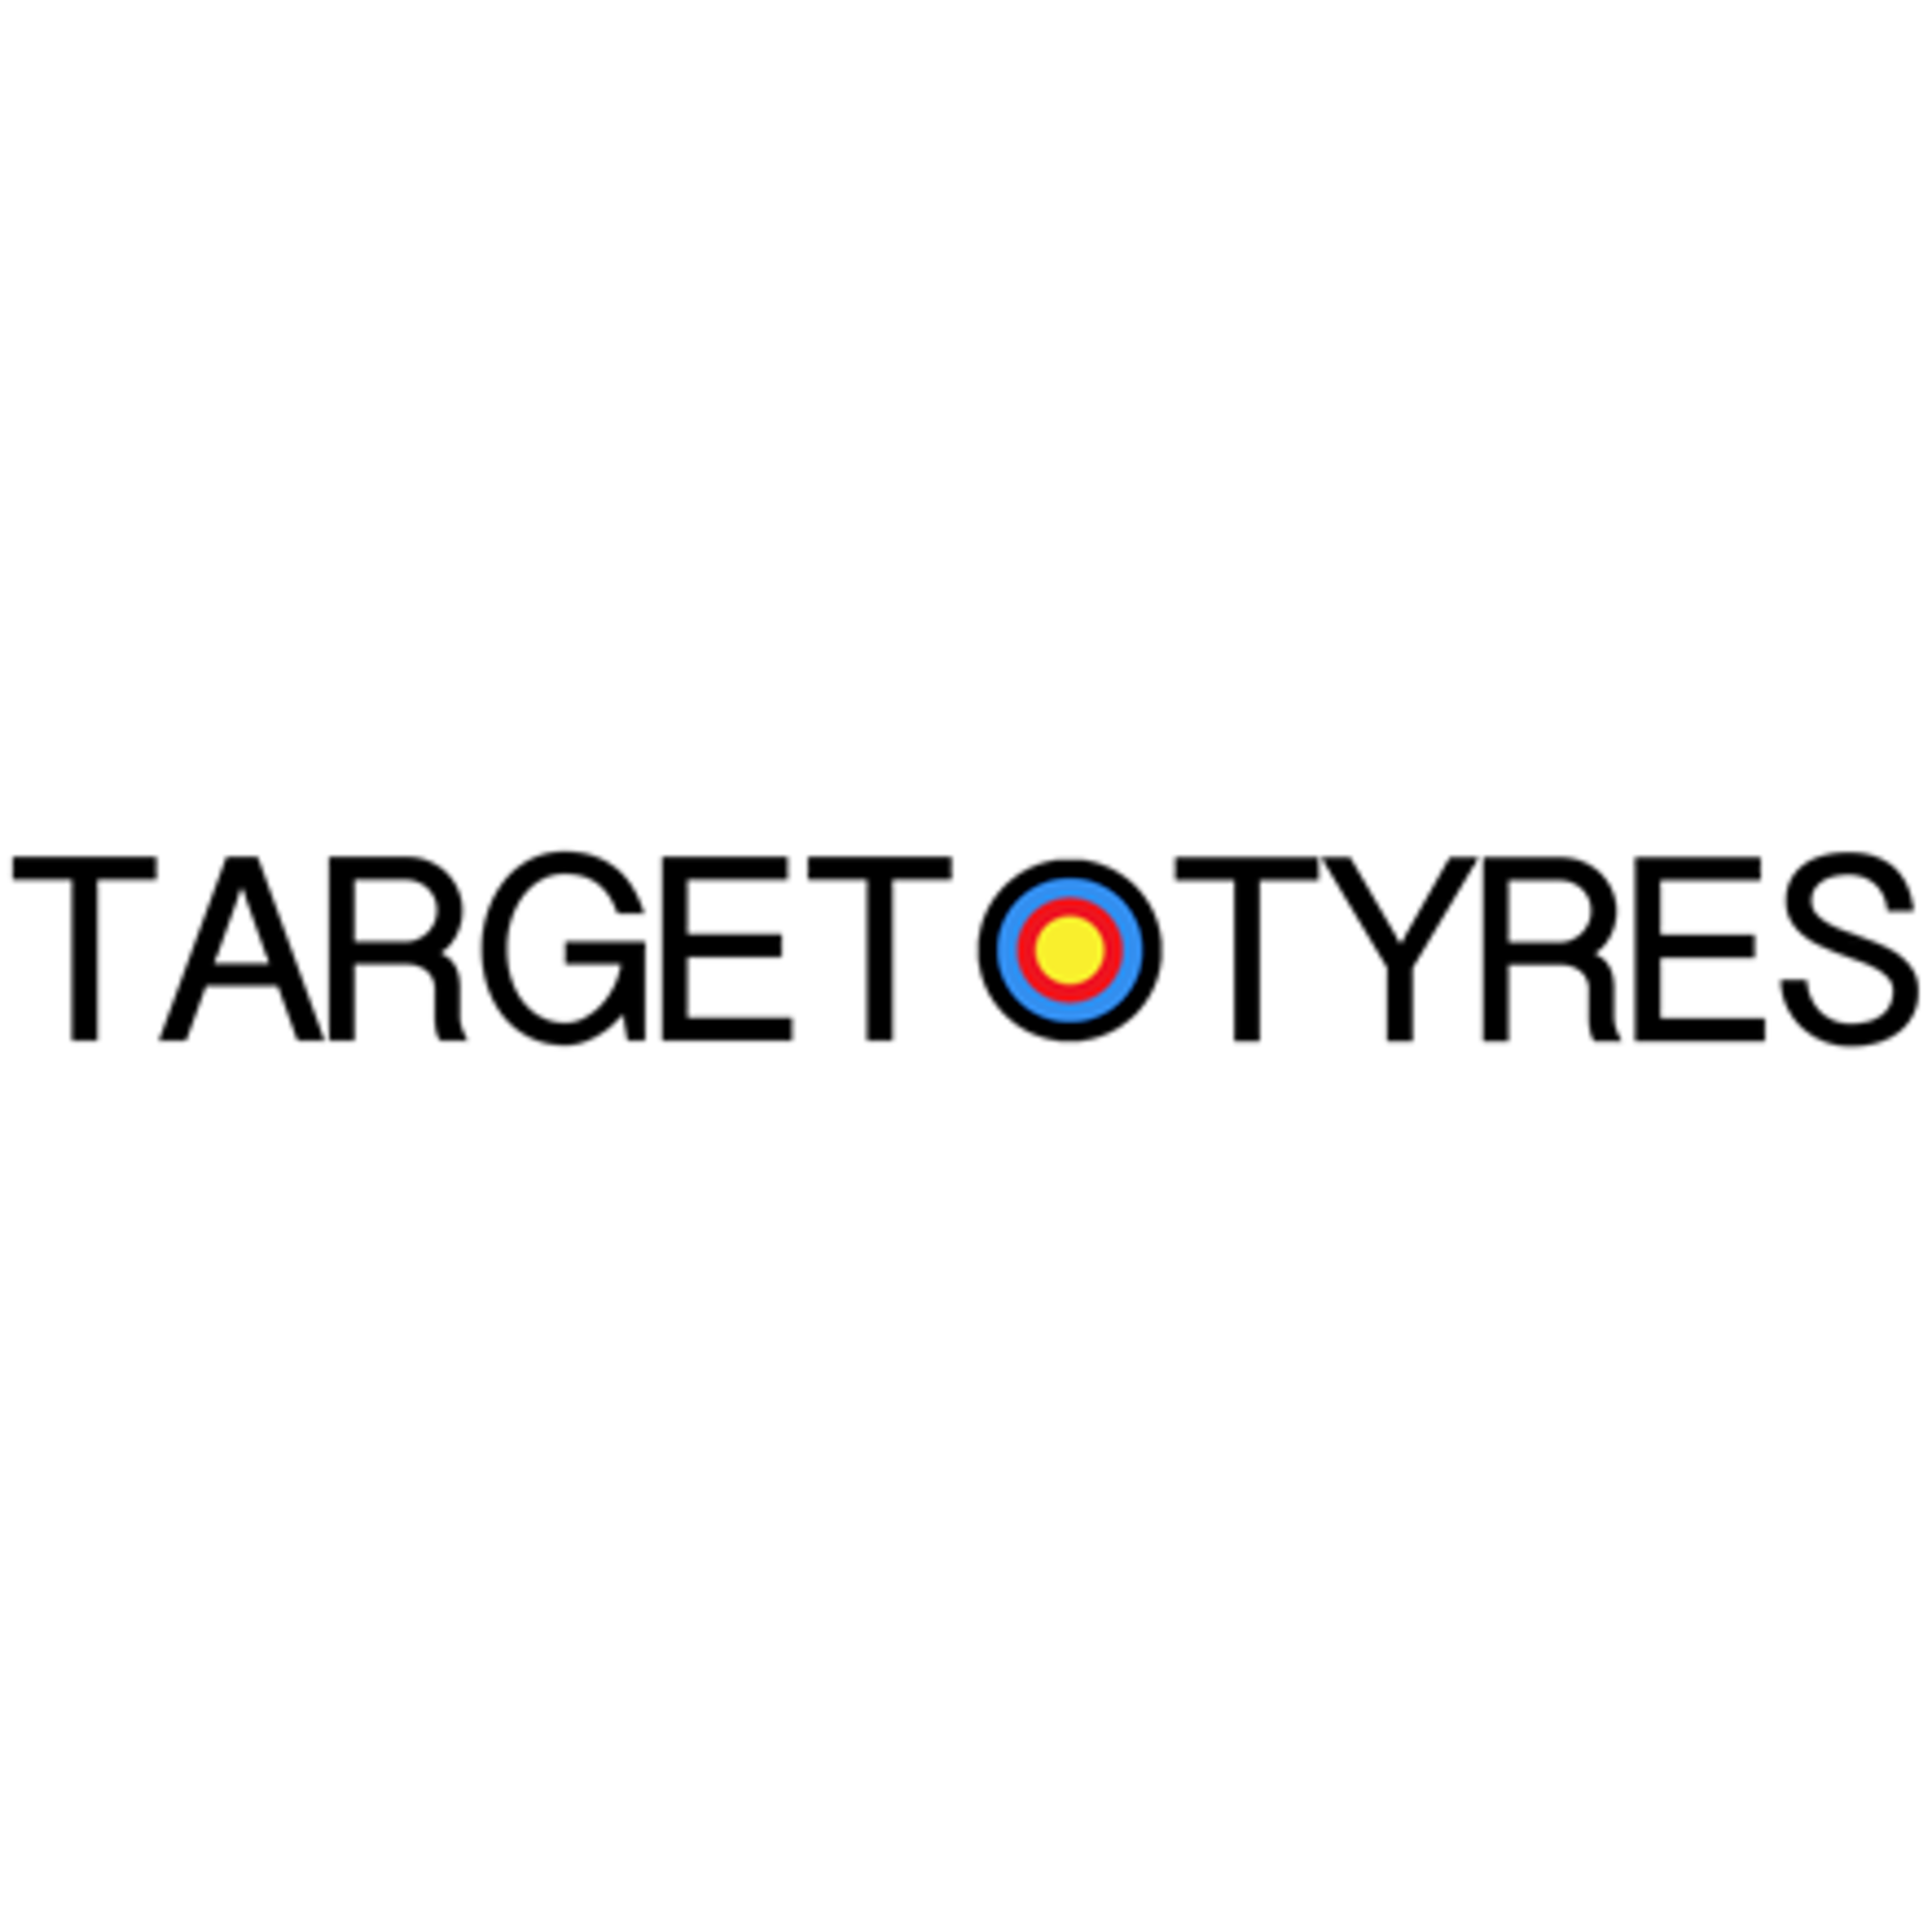 Target Tyres (Glenrothes) - Glenrothes, Fife KY7 4AA - 01592 755655 | ShowMeLocal.com